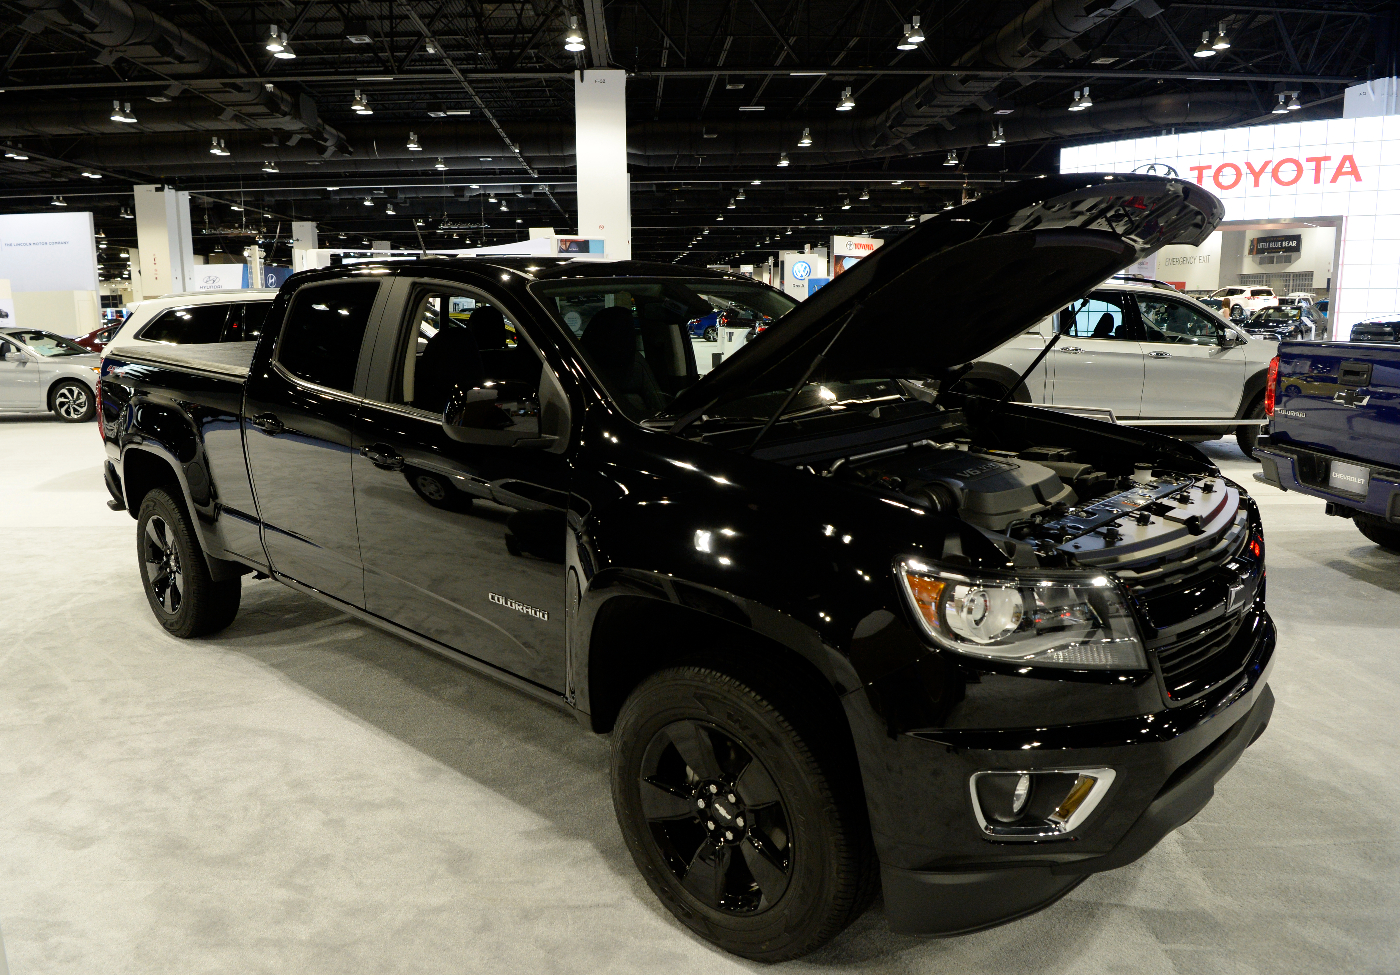 The Chevy Colorado is a worthy mid-size truck.